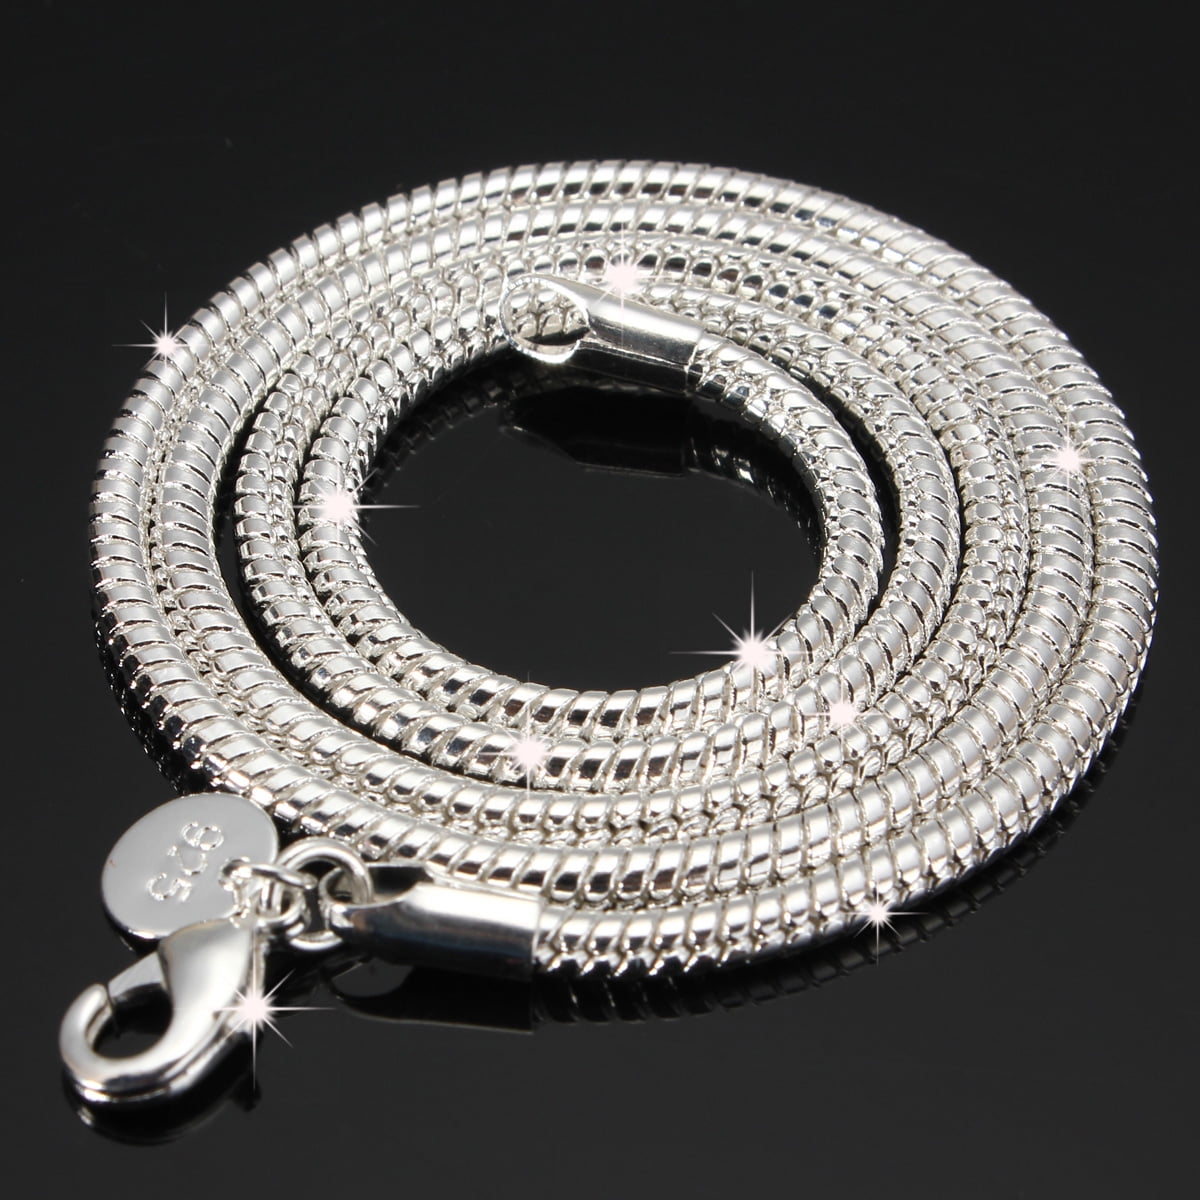 18" Silver-plated 1.5mm Snake necklaces w/spring clasp Lot of 12 #8 